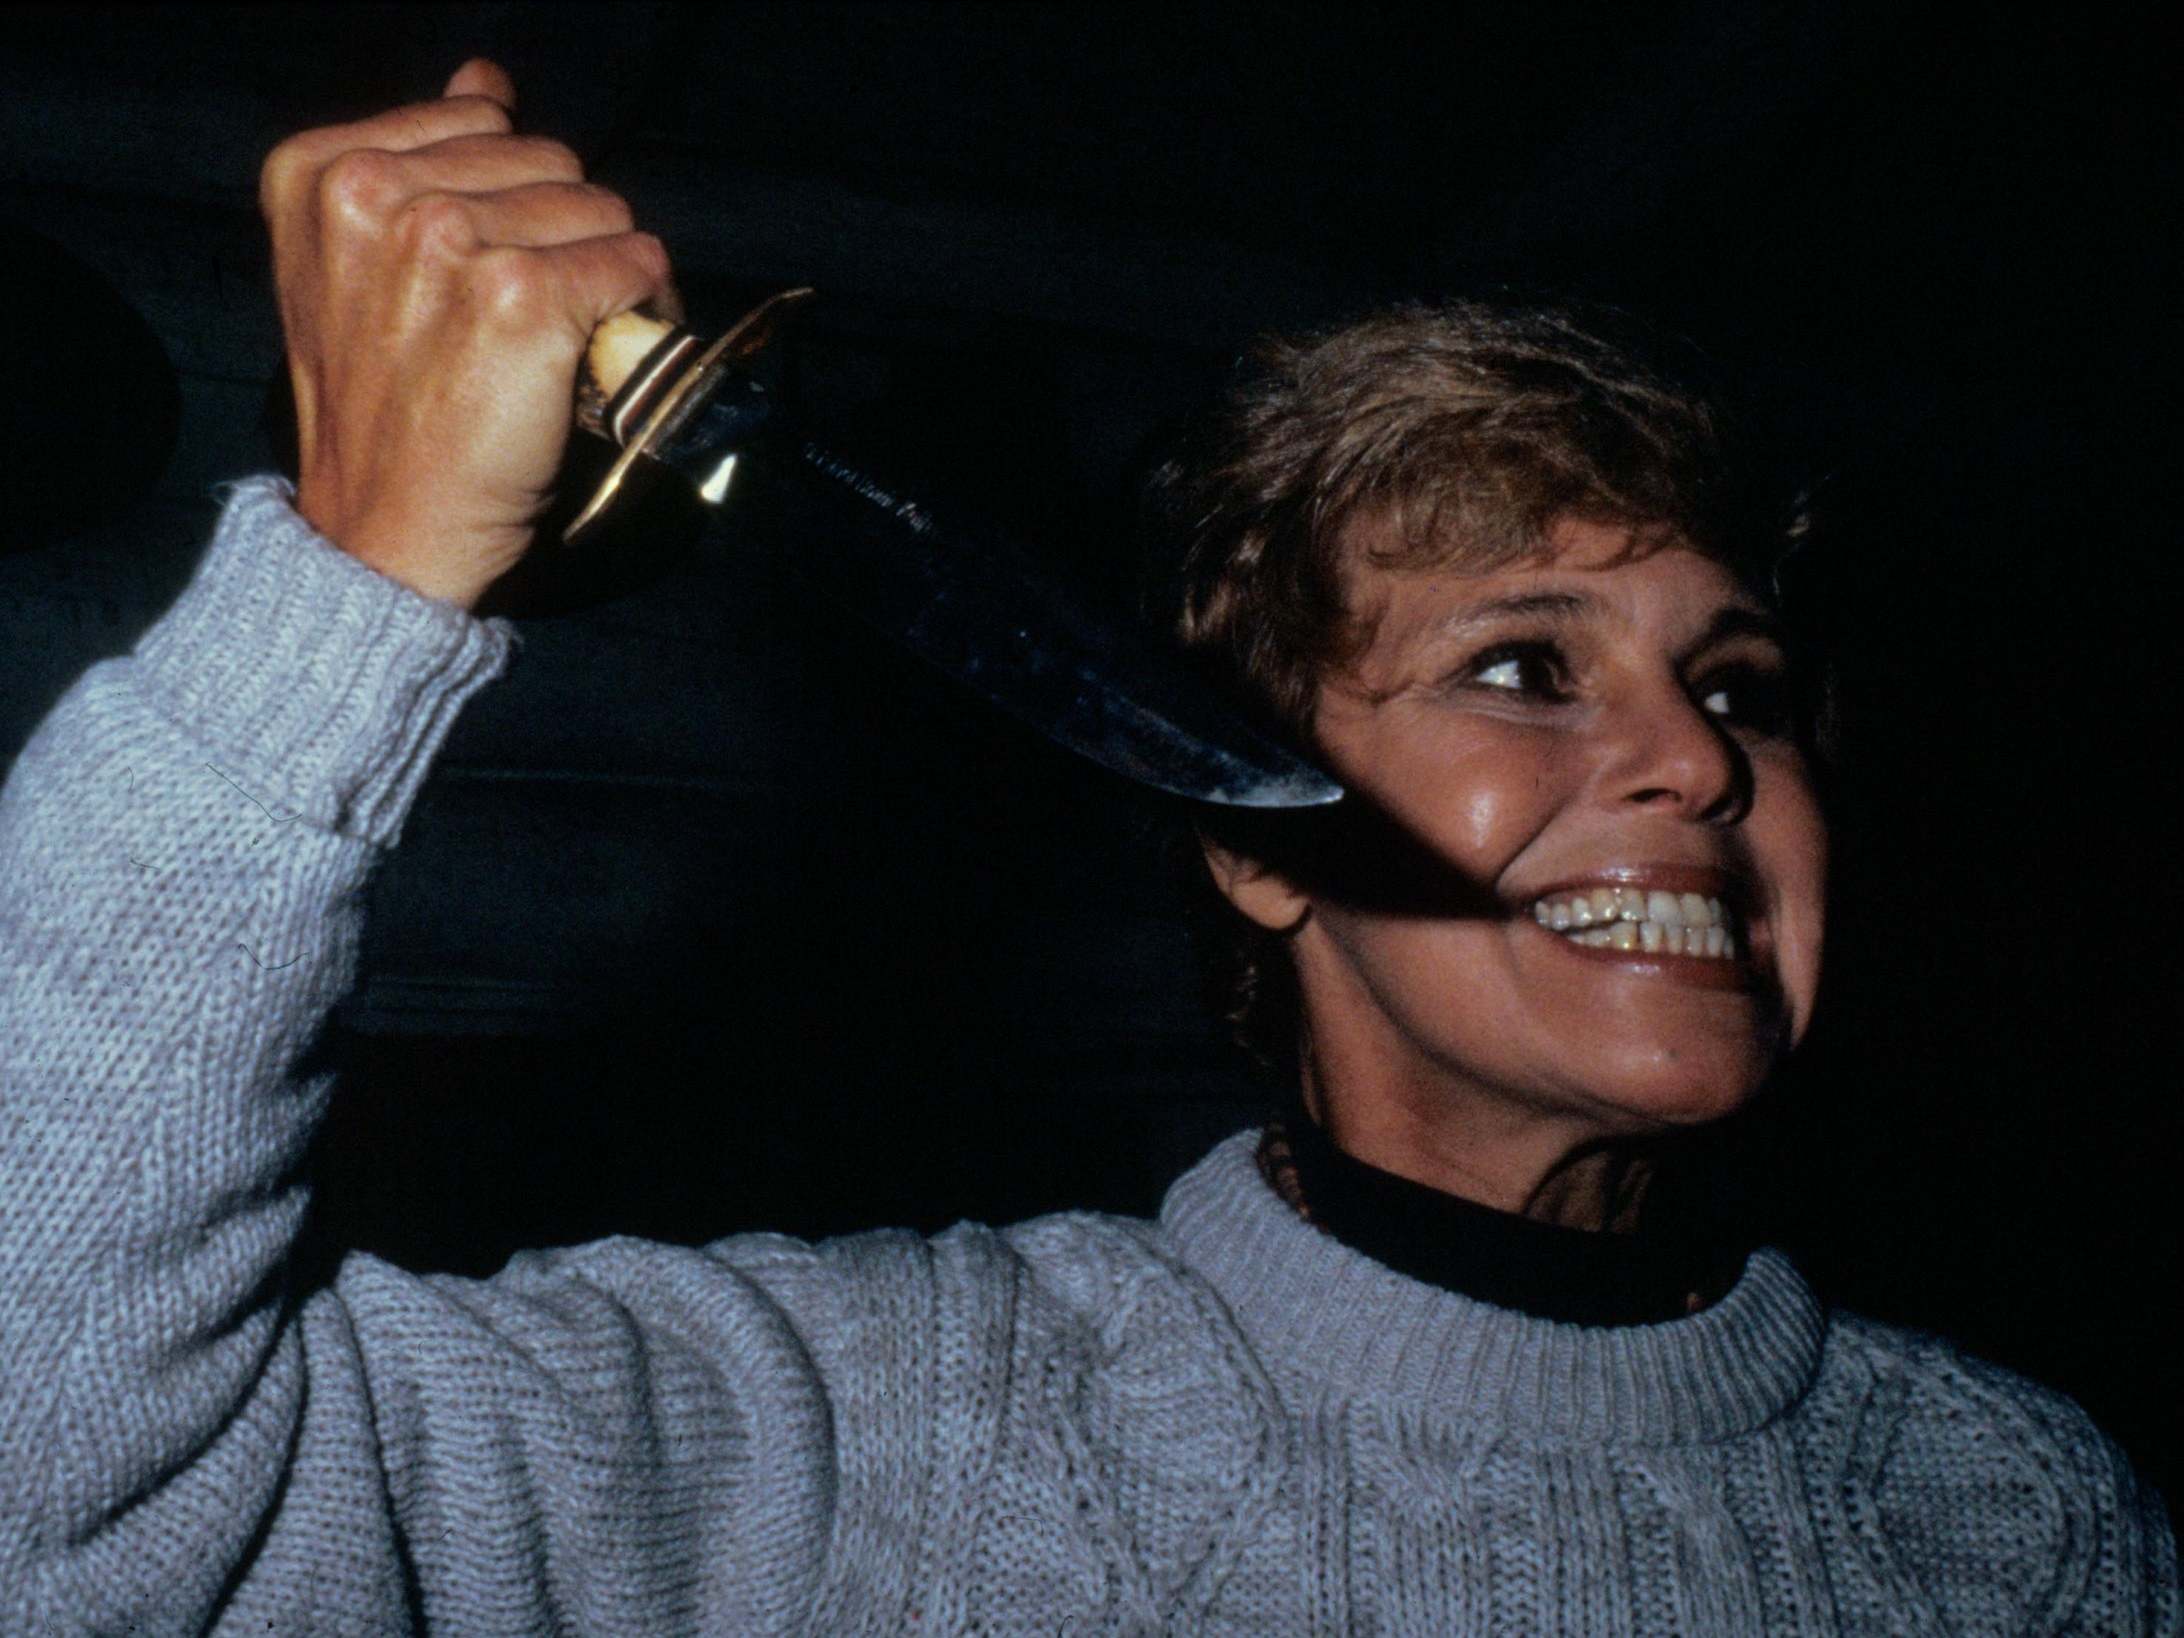 Grin and scare it: Betsy Palmer’s Mrs Vorhees from ‘Friday the 13th’ was a different kind of villain